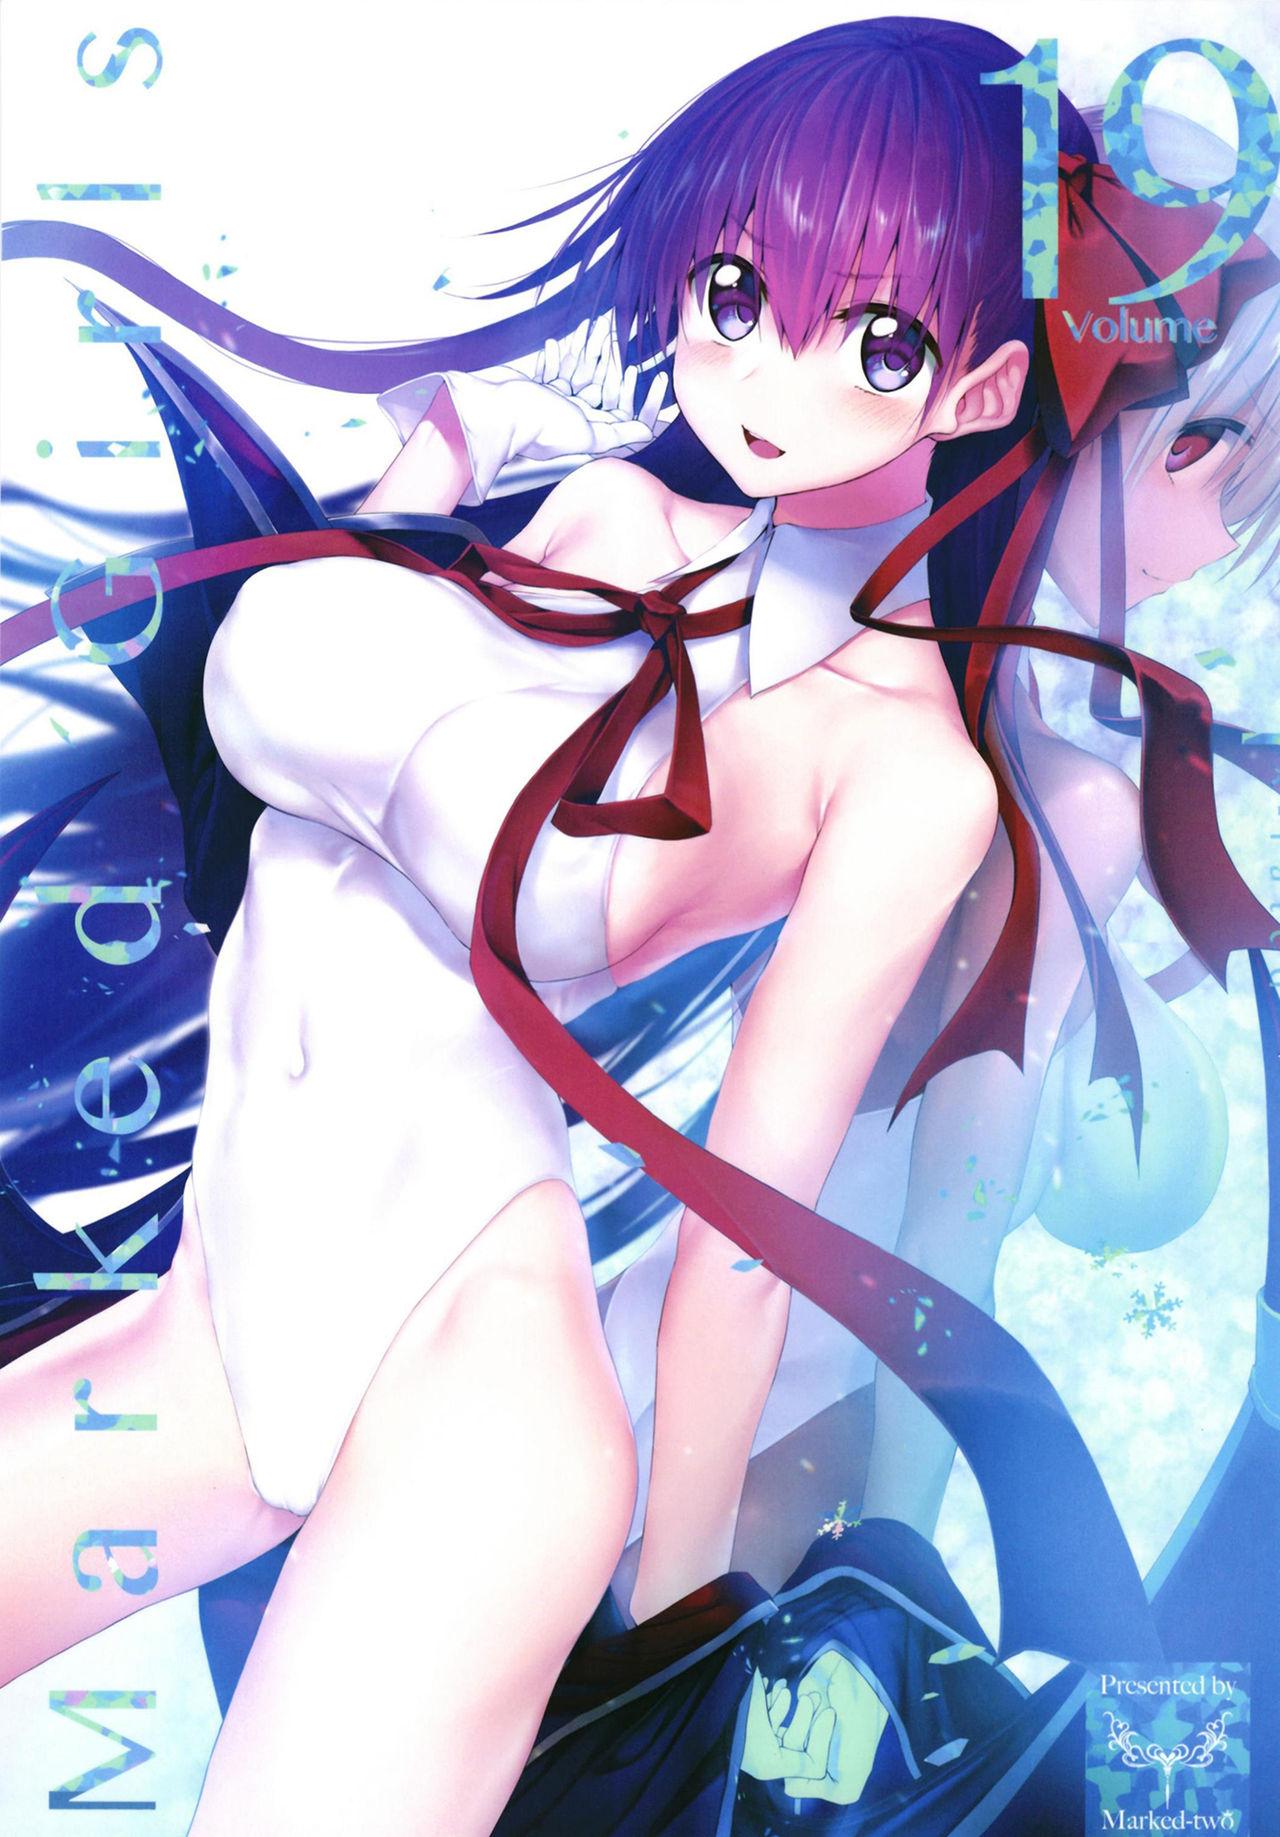 Tetas Grandes Marked Girls Vol. 19 - Fate grand order One - Picture 1